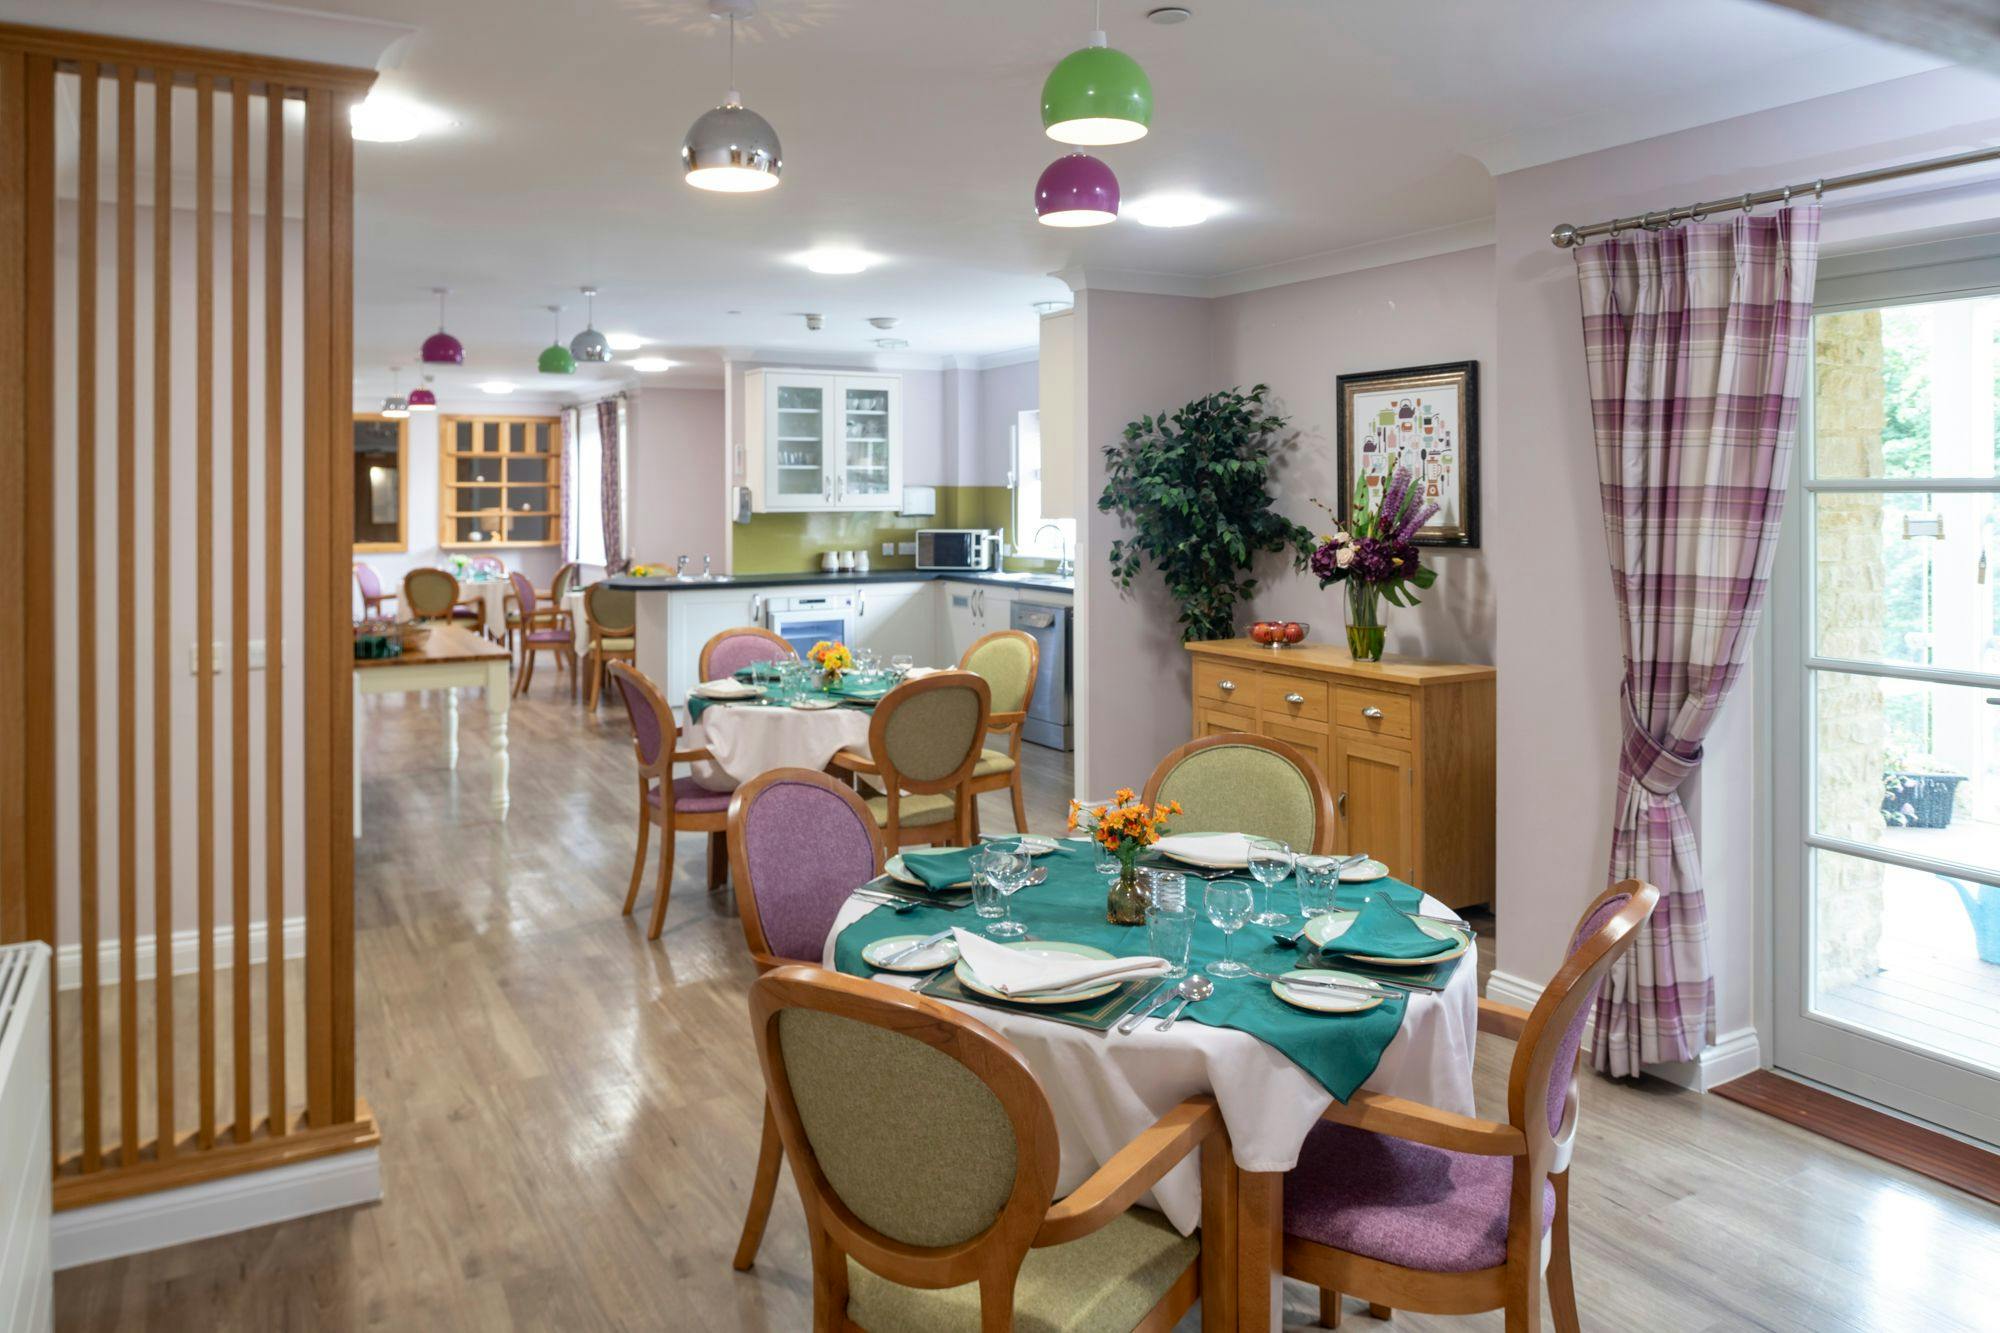 Dining area at Edwardstow Court Care Home in Stow-on-the-Wold, Cotswold